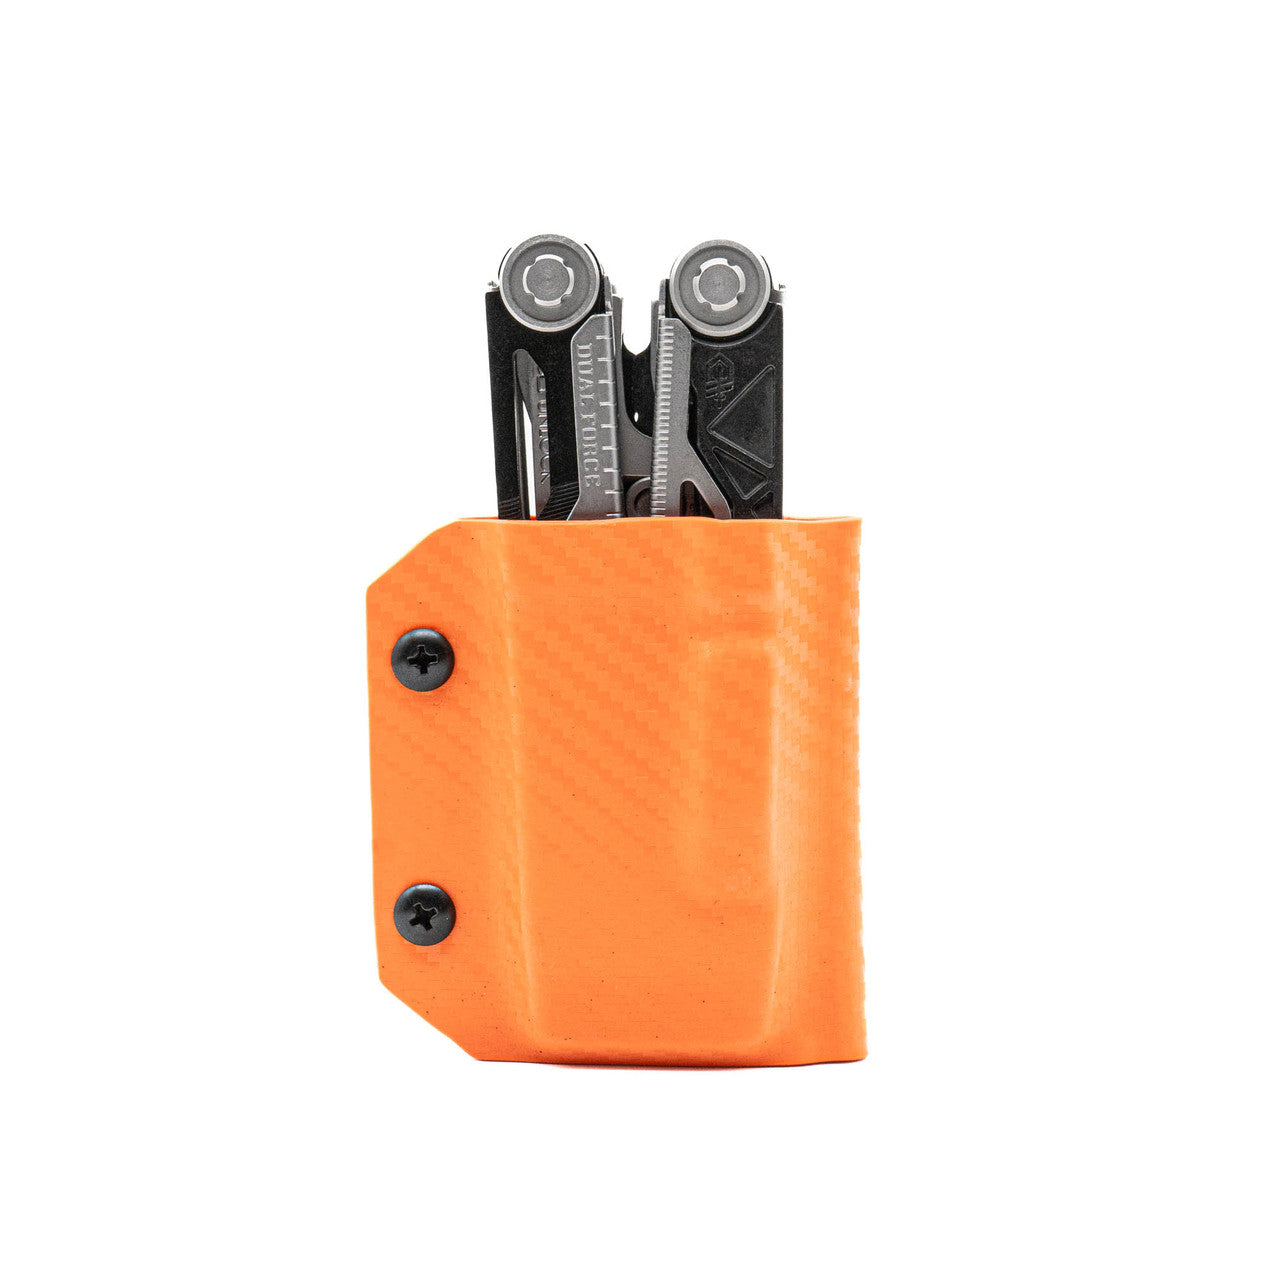 Kydex Sheath for the Gerber Dual-Force Clip & Carry